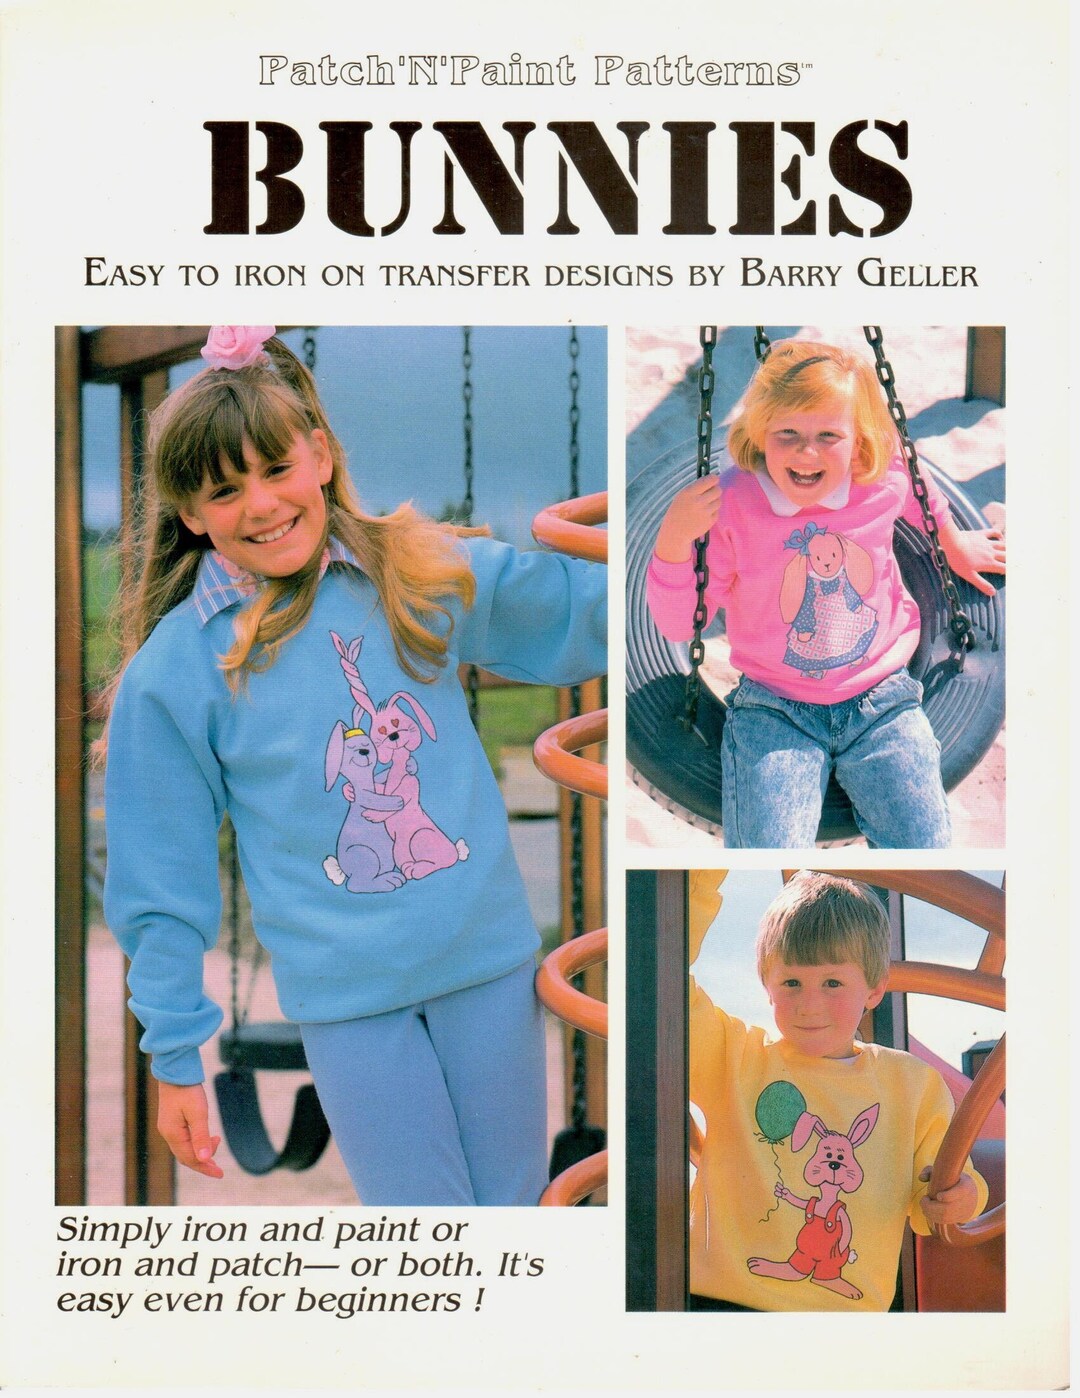 Bunnies: Easy to Iron on Transfer Designs by Barry Geller